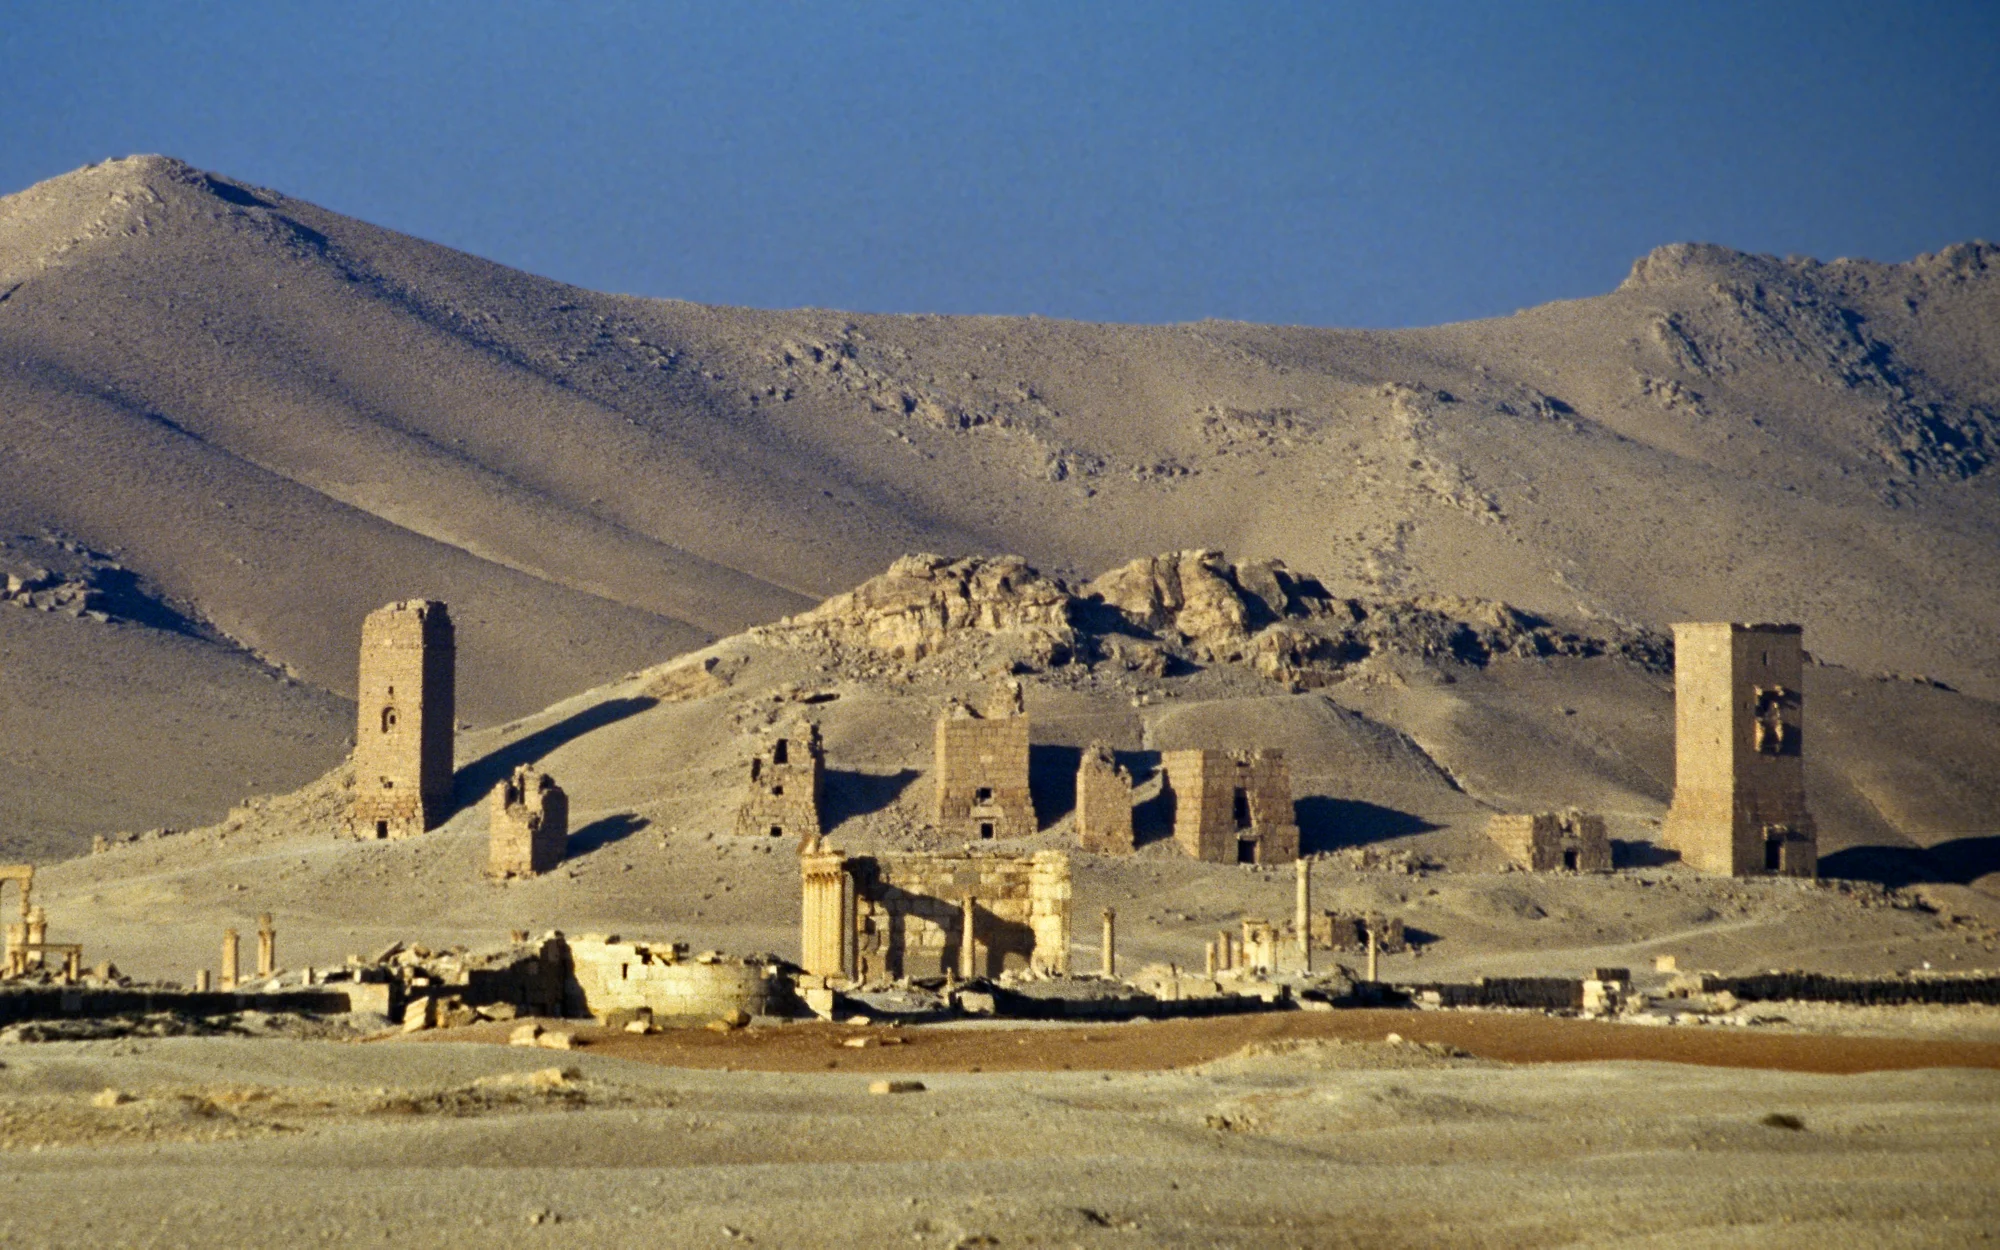 The tower tombs, Valley of the Tombs